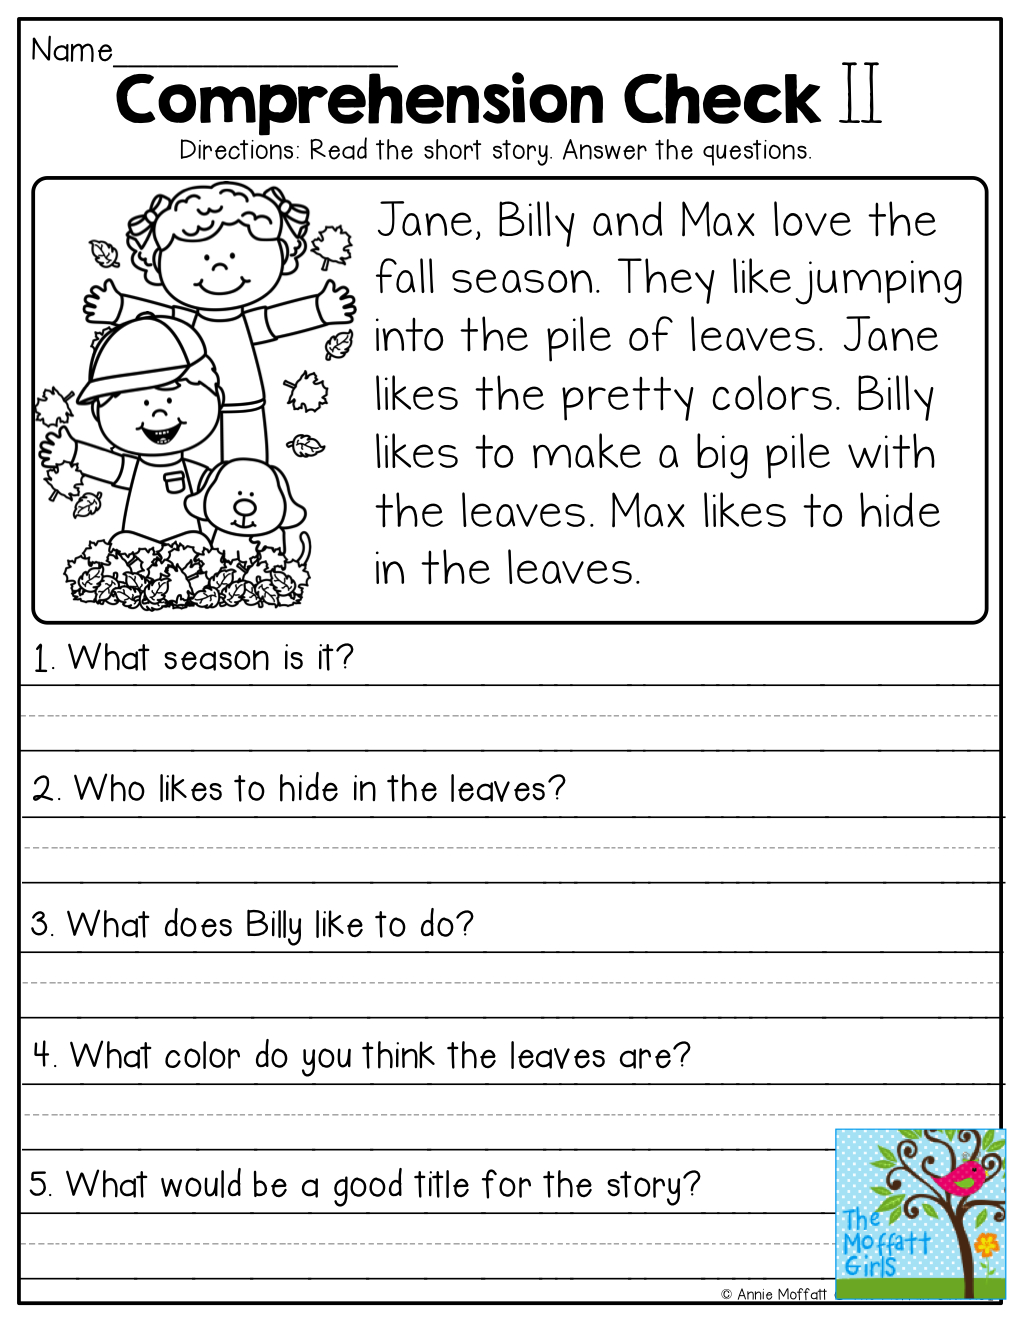 Comprehension Checks And So Many More Useful Printables! | Test Of - Free Printable Comprehension Worksheets For Grade 5